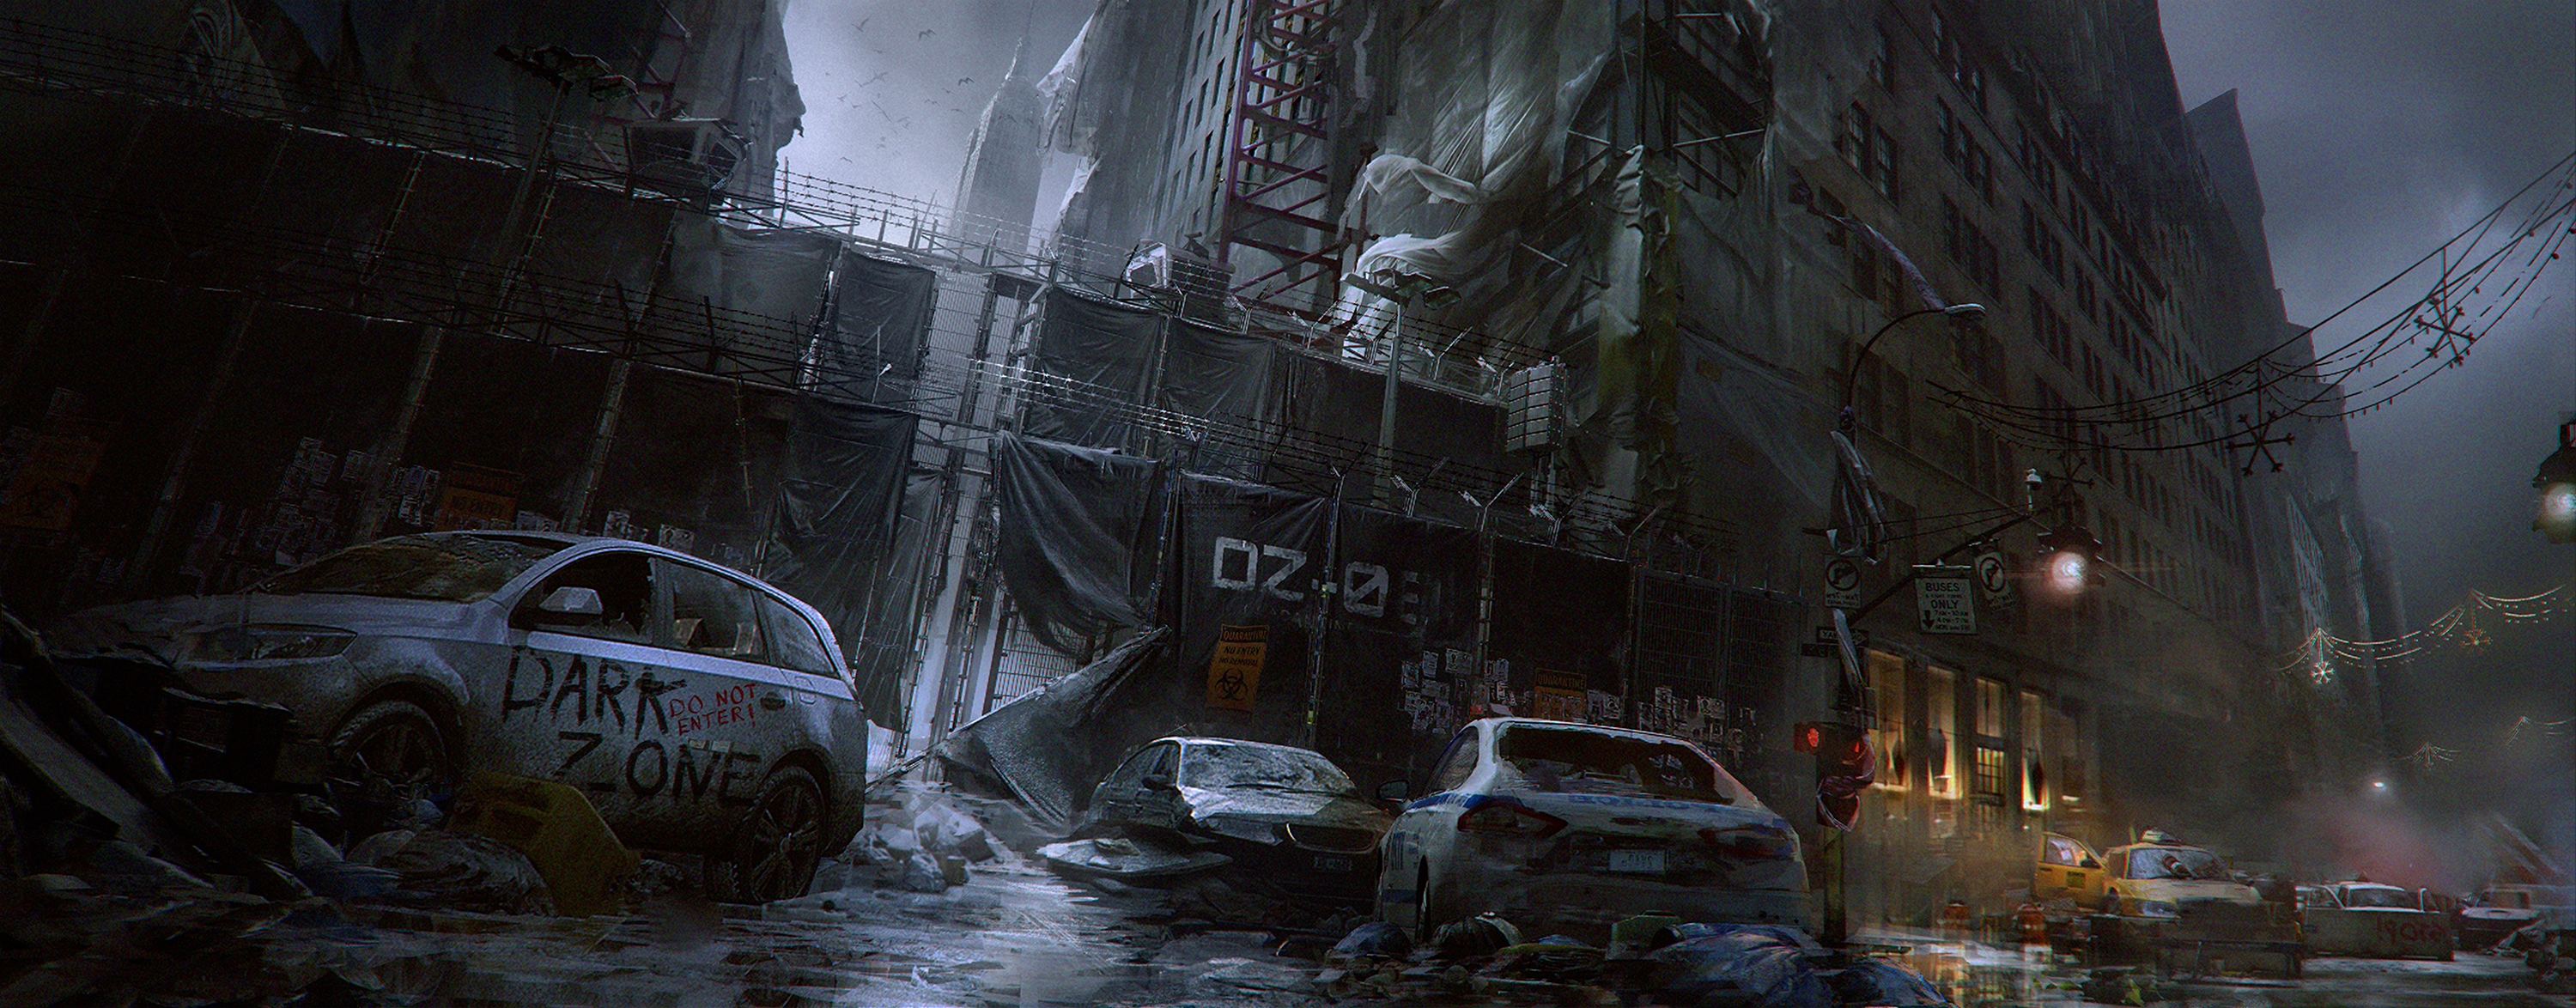 HD desktop wallpaper: Apocalypse, Video Game, Concept Art, Tom Clancy, Tom  Clancy's The Division download free picture #741506